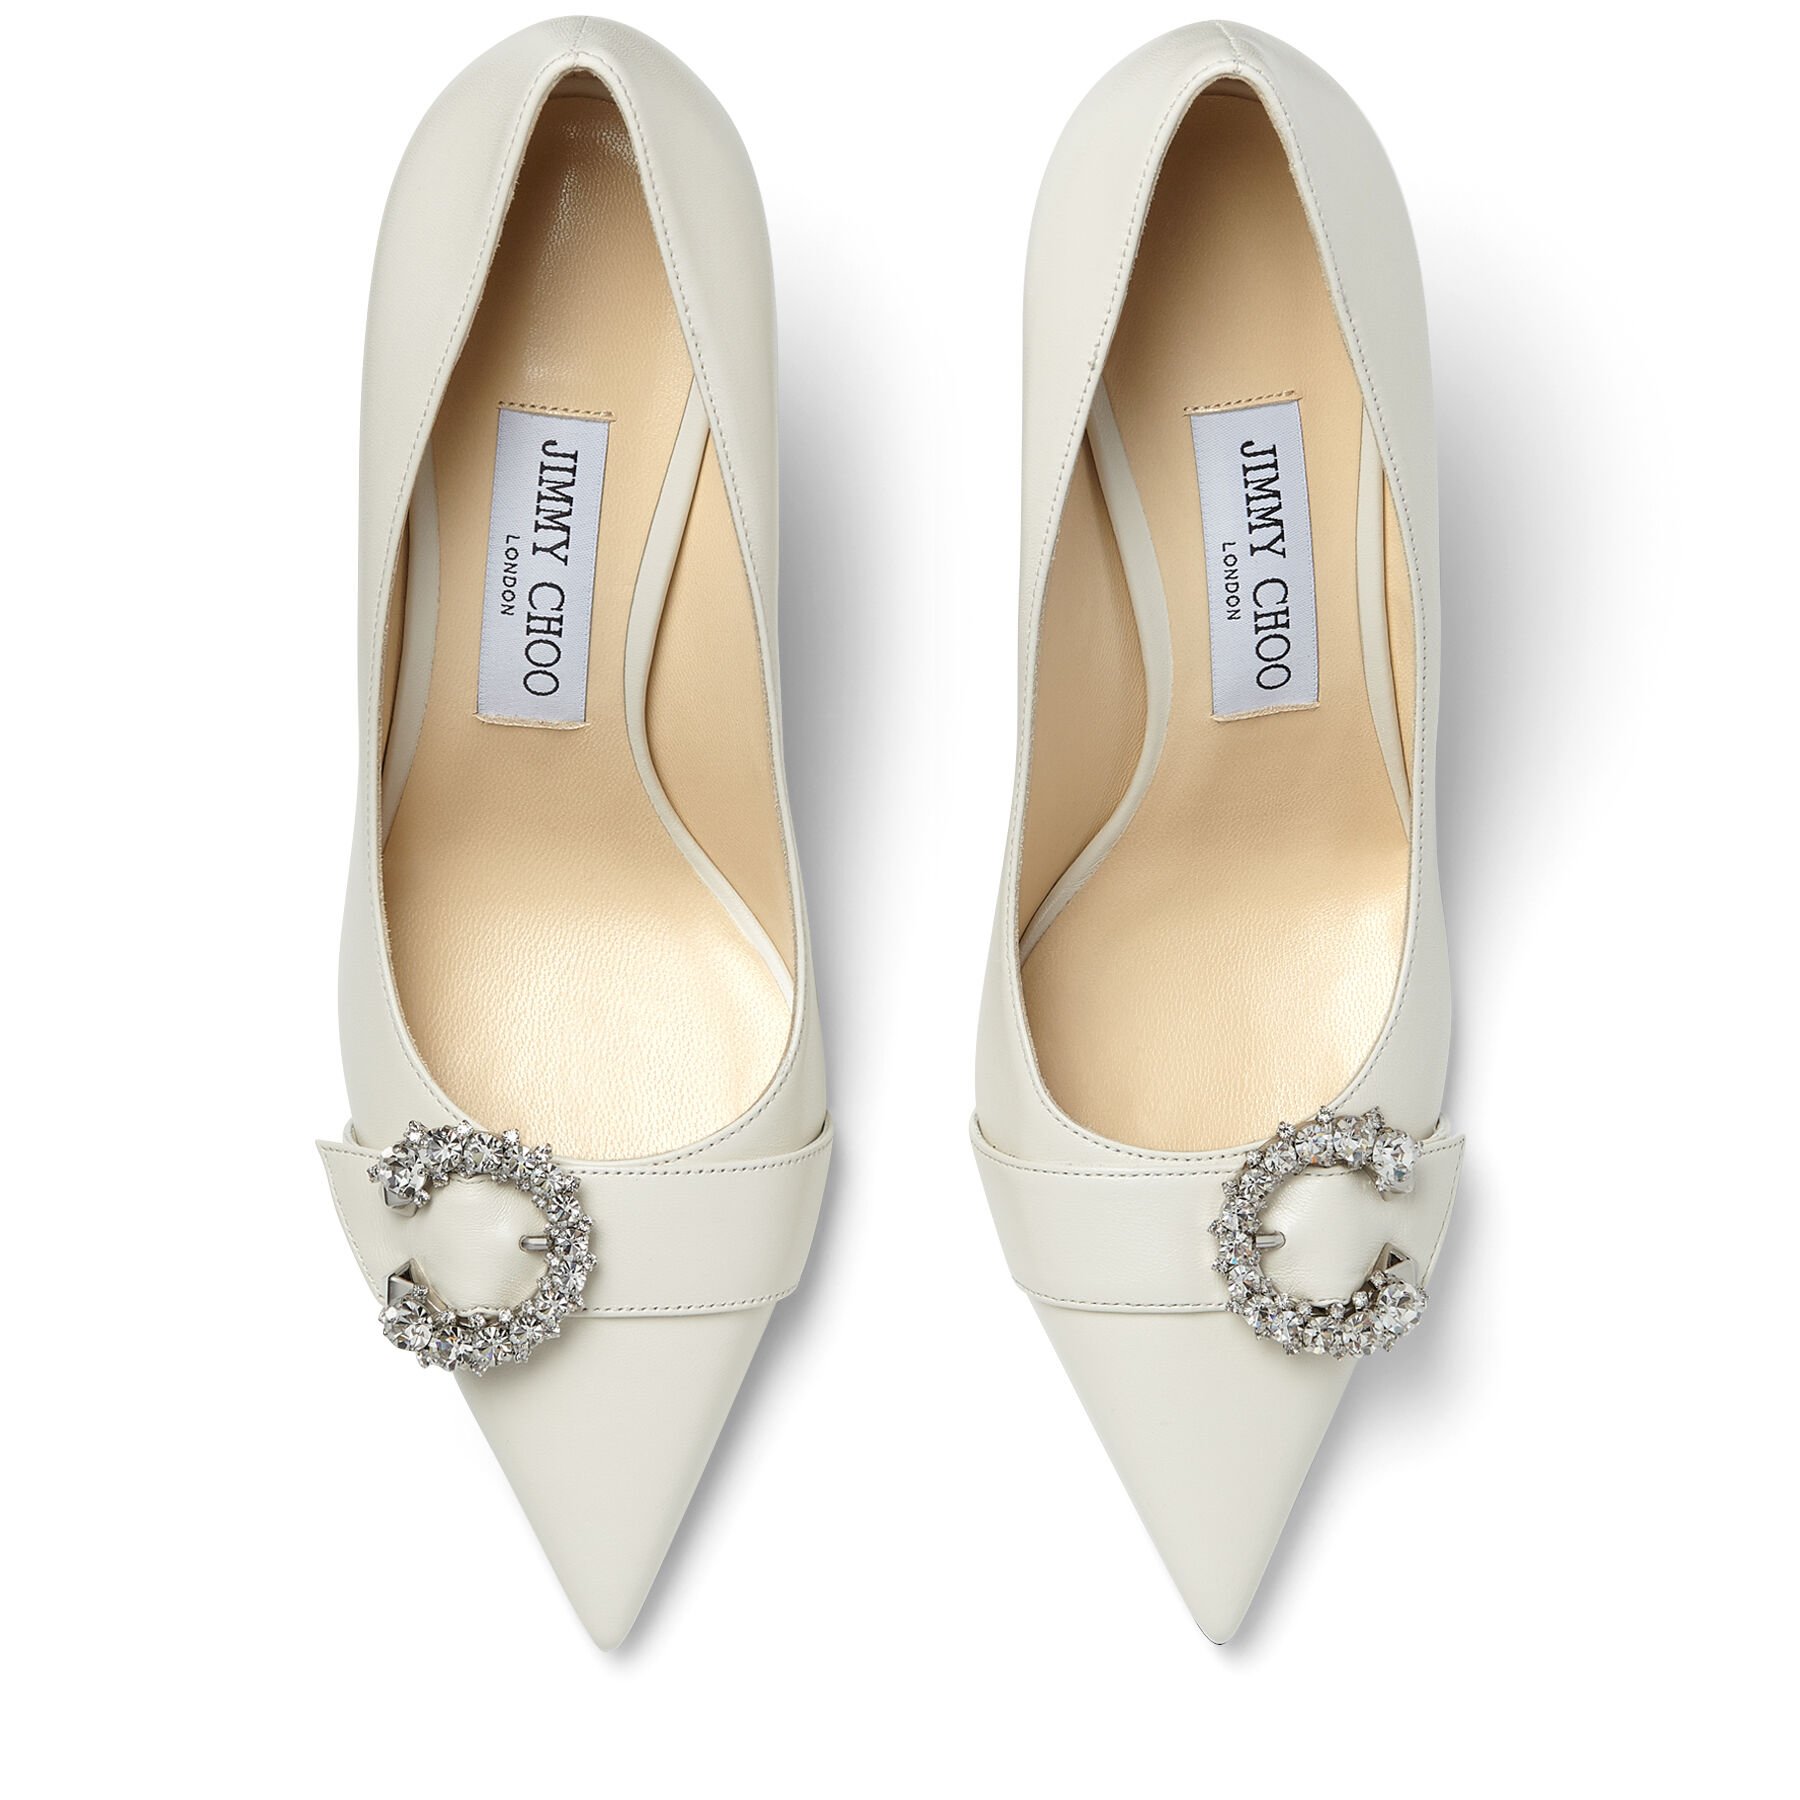 Latte Nappa Leather Pumps with Crystal Embellishment | SARESA 65 | Pre ...